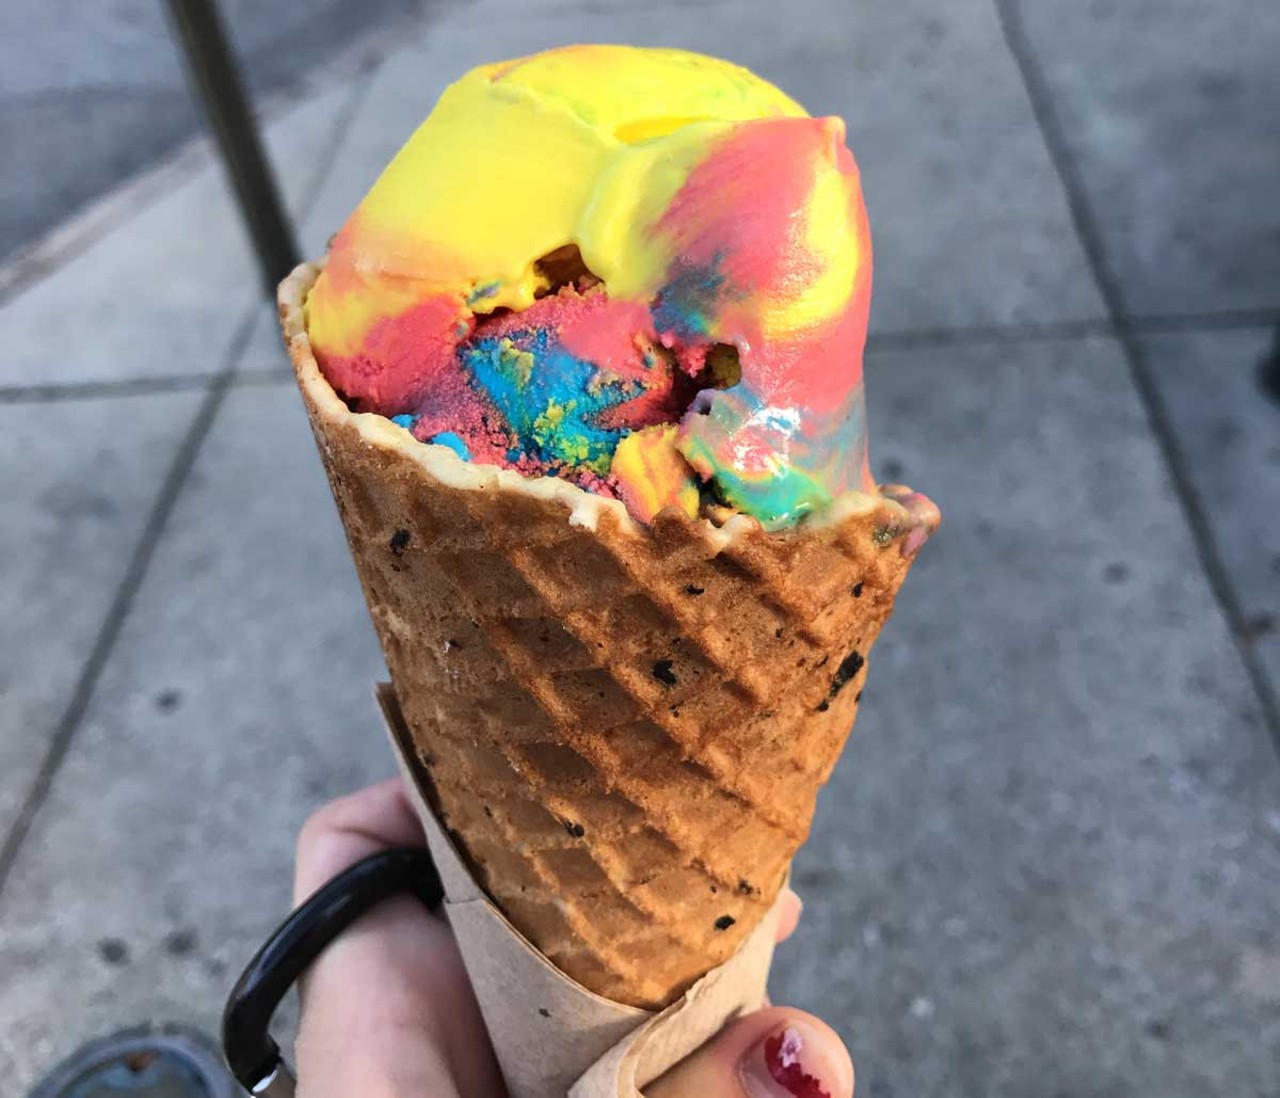 
Enjoy ice cream
While ice cream in the ice cold might not be the best idea, the winter is also a good time for comforting sweets. On days when it's not too freezing, head over to metro Detroit's essential ice cream shops that do business year-round.
